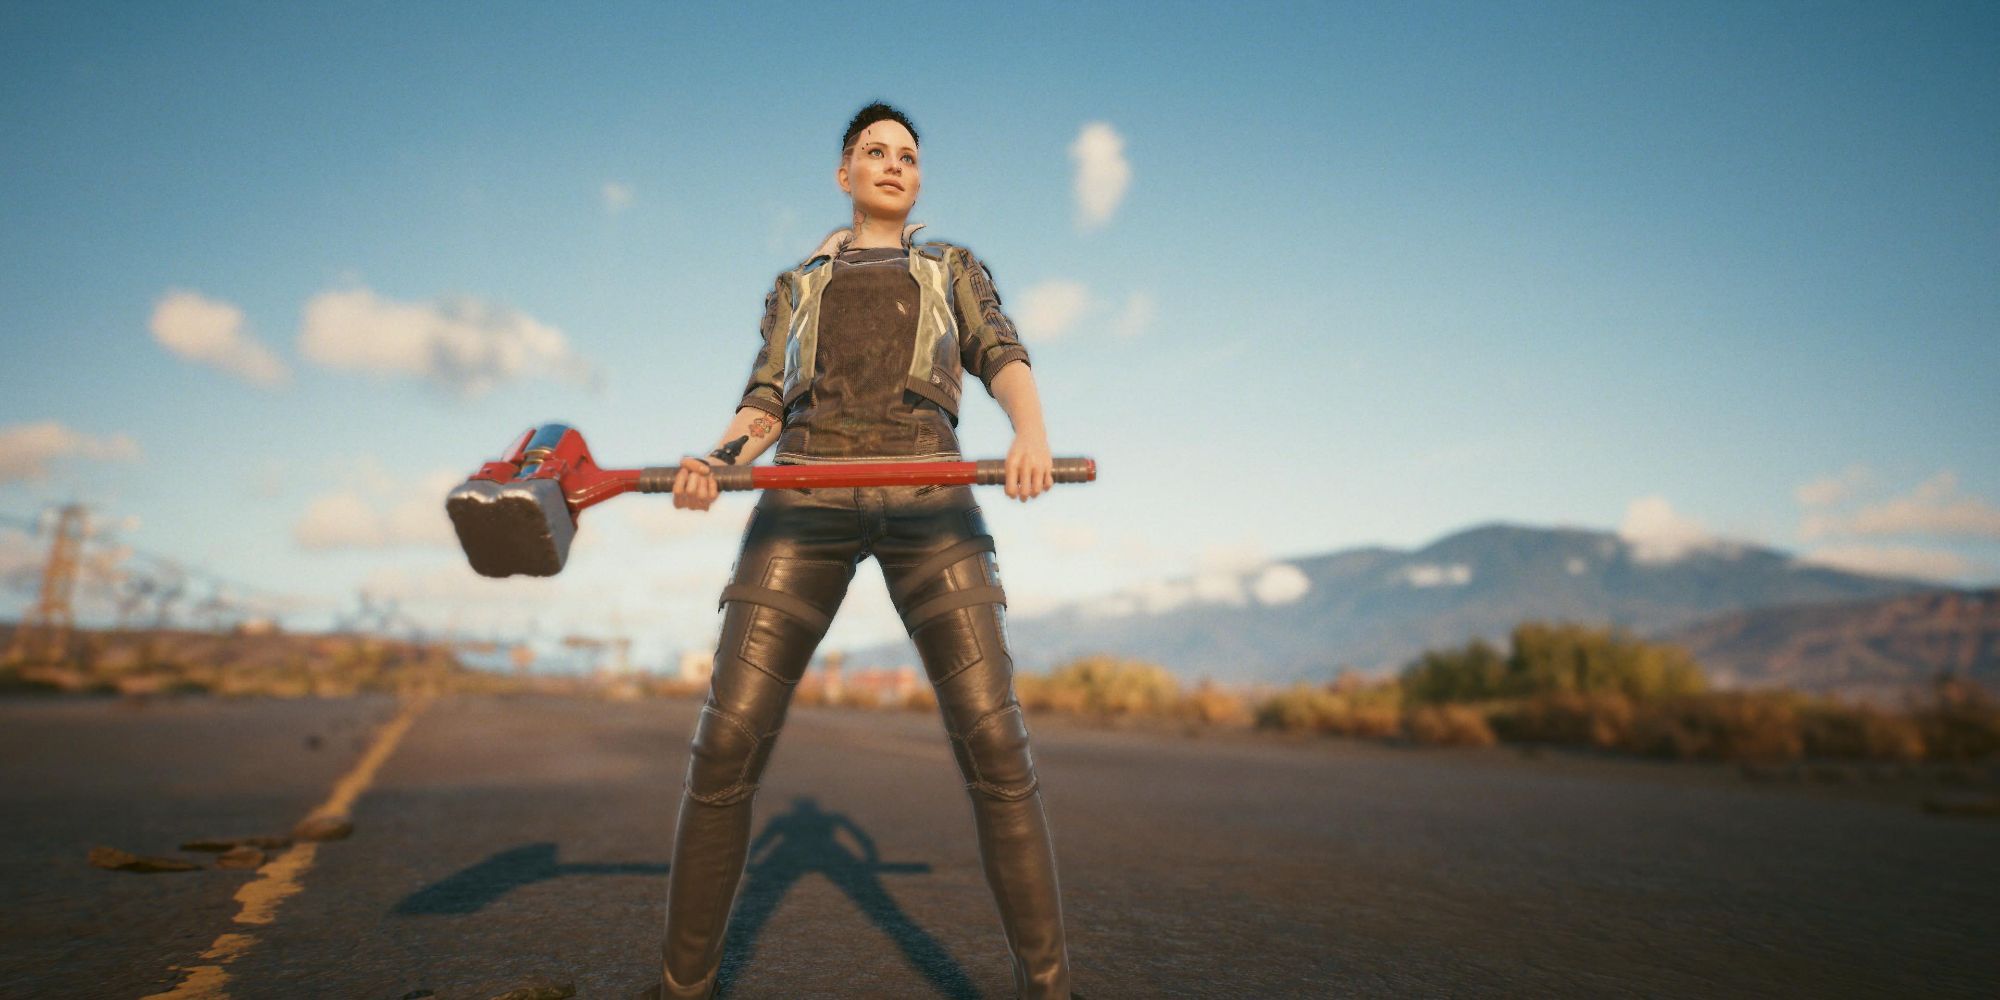 Cyberpunk 2077 V Standing In Road Holding A Hammer